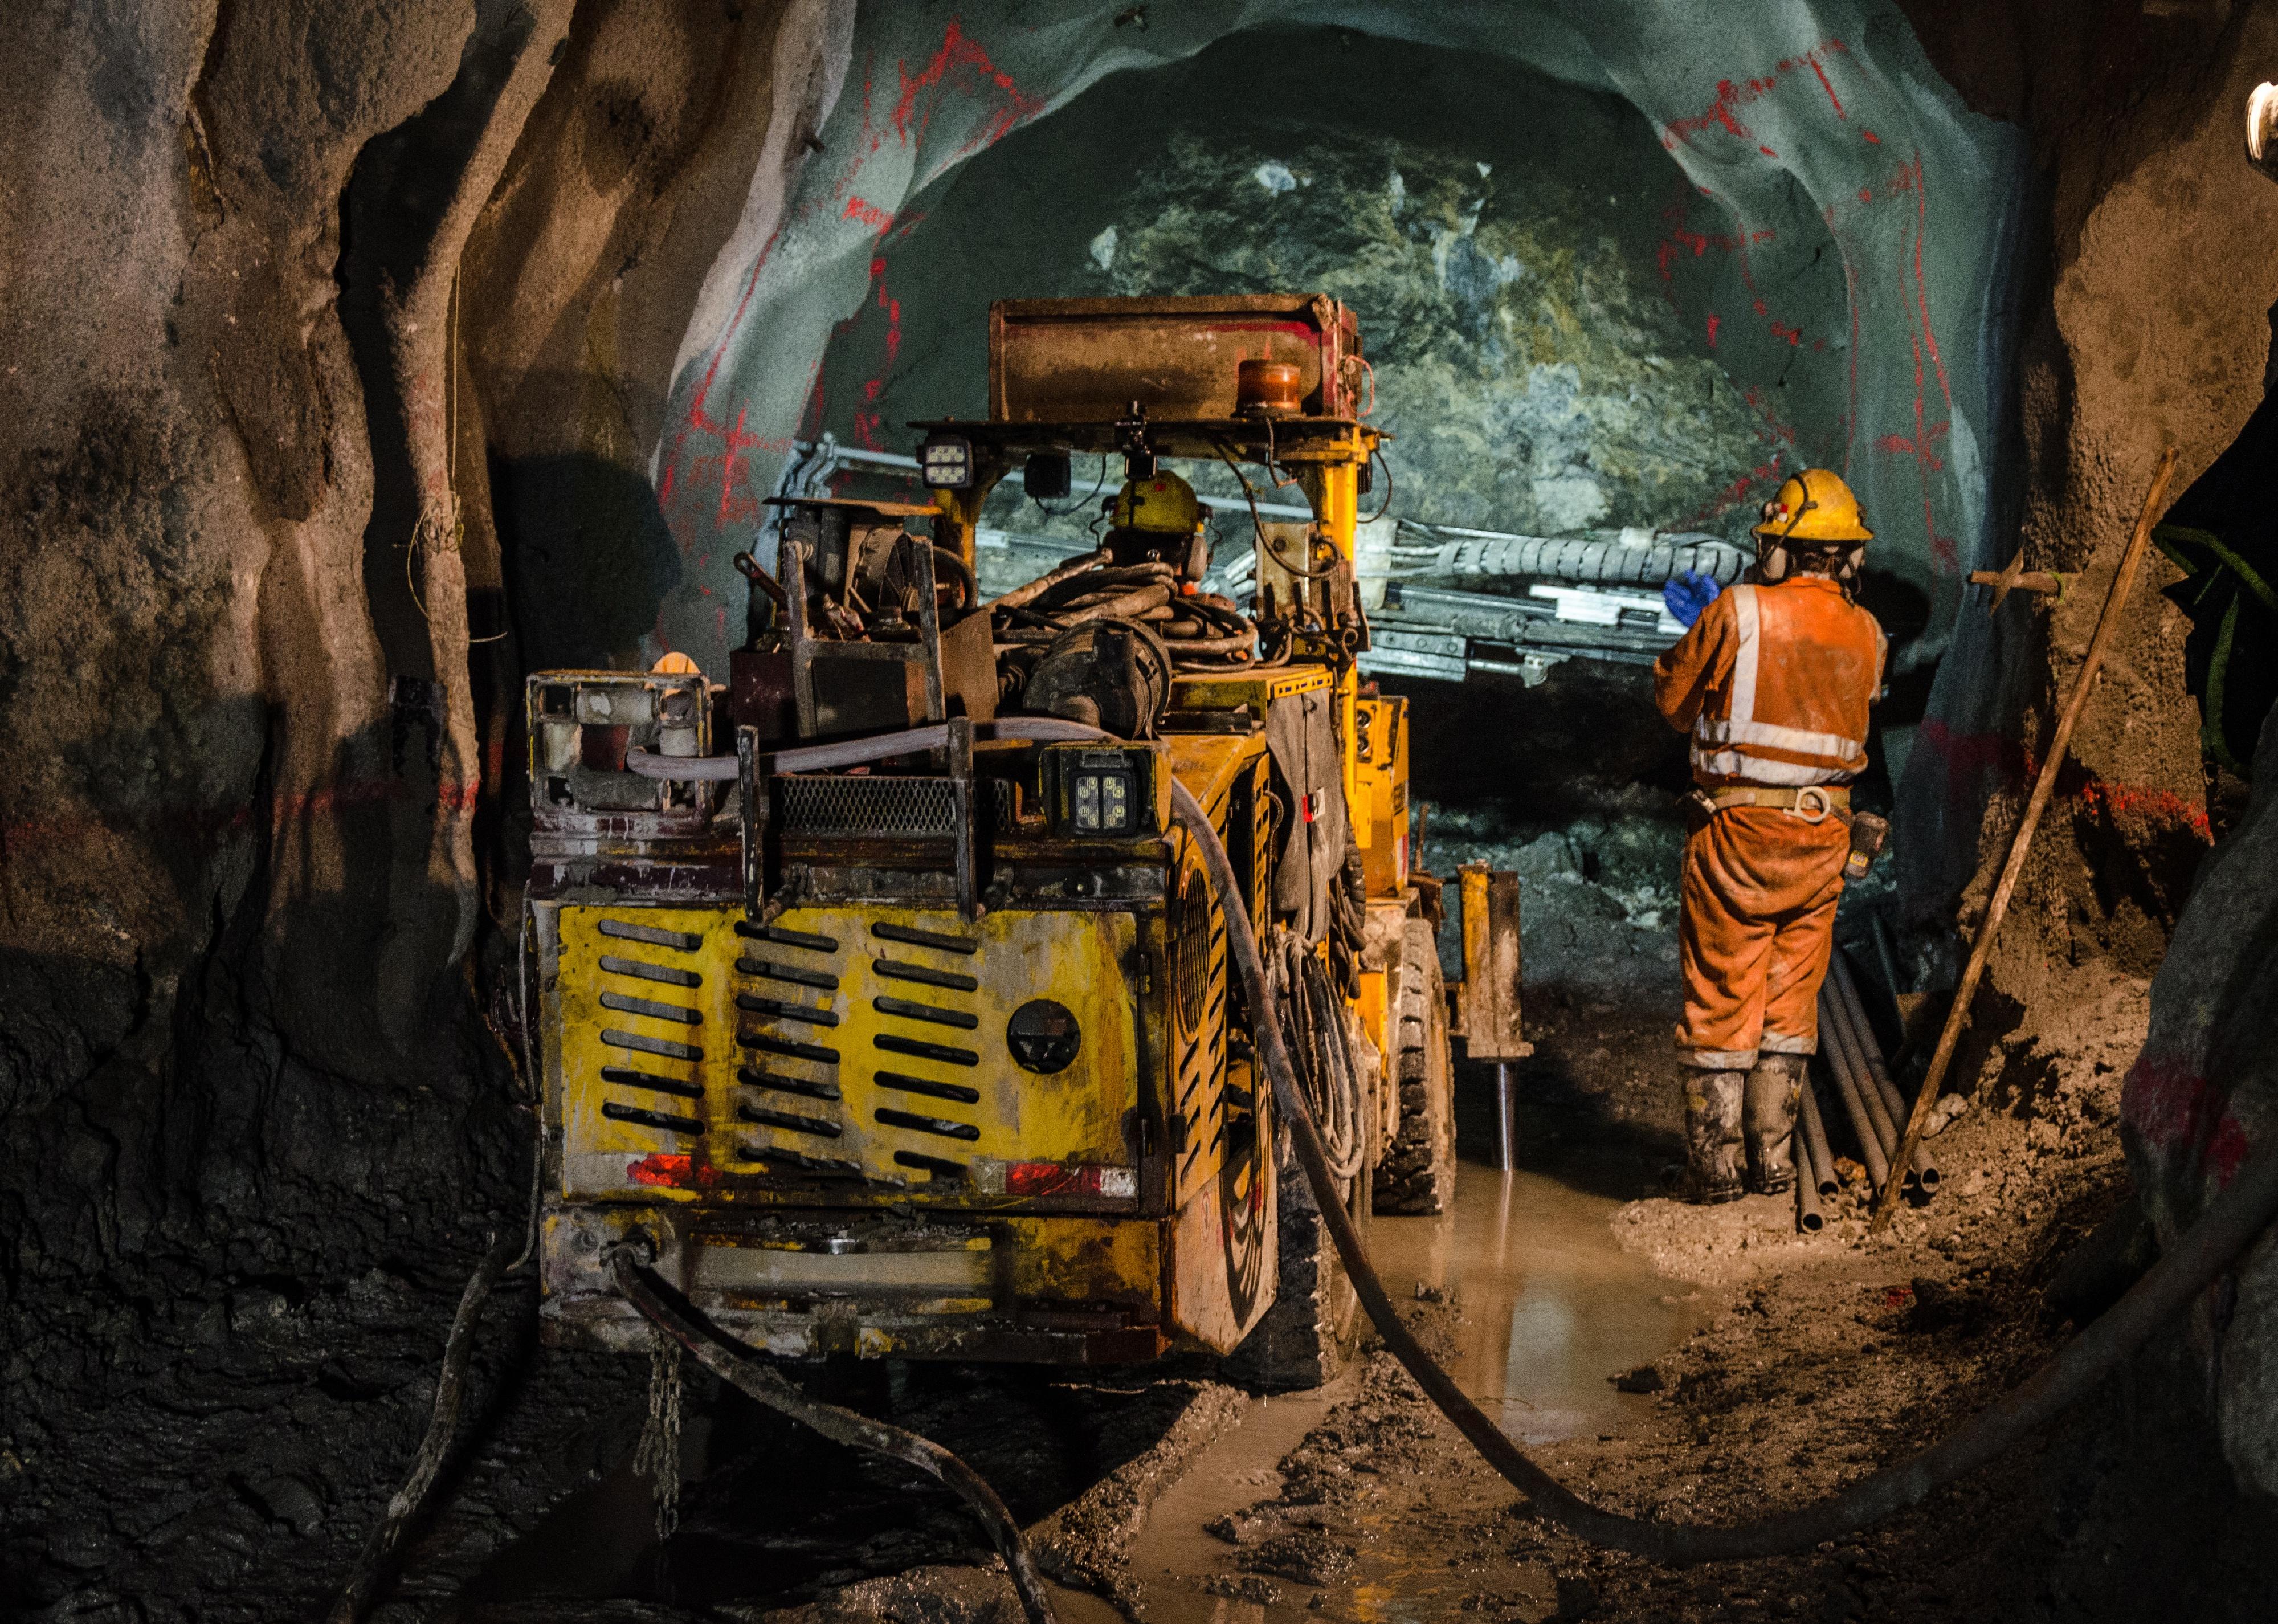 Workers operate heavy machinery in a mine.